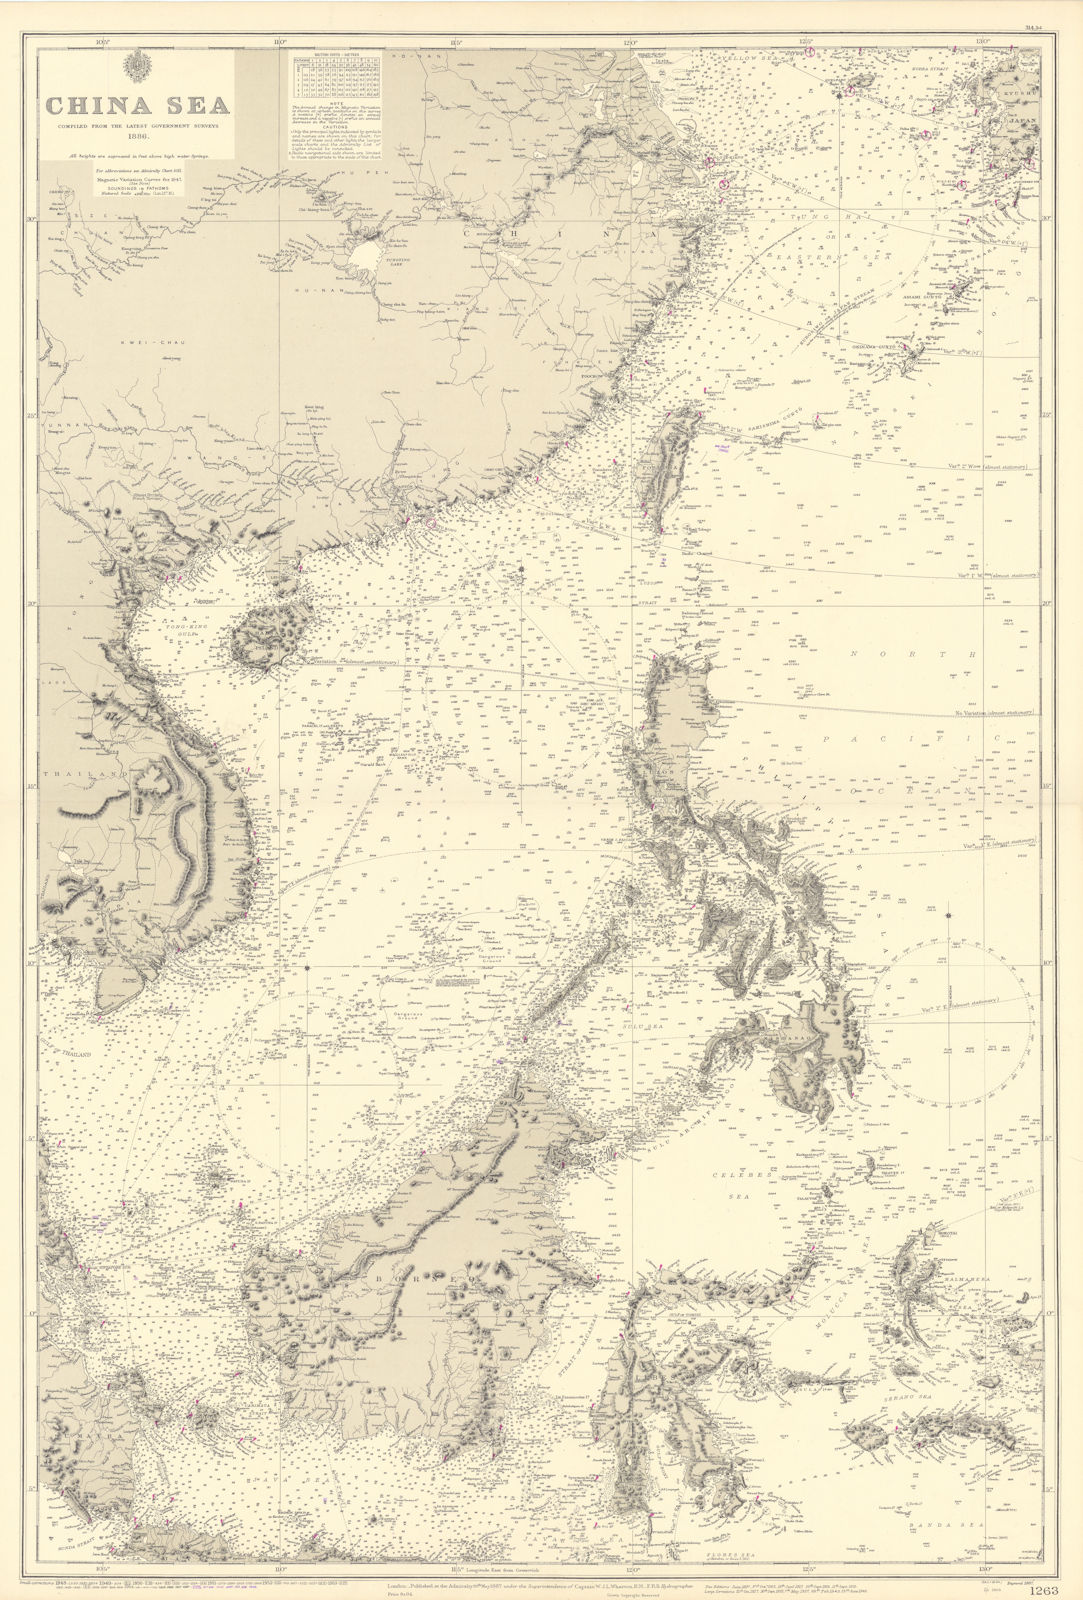 China Sea. East Asia. Philippines Indonesia. ADMIRALTY sea chart 1887 (1955) map